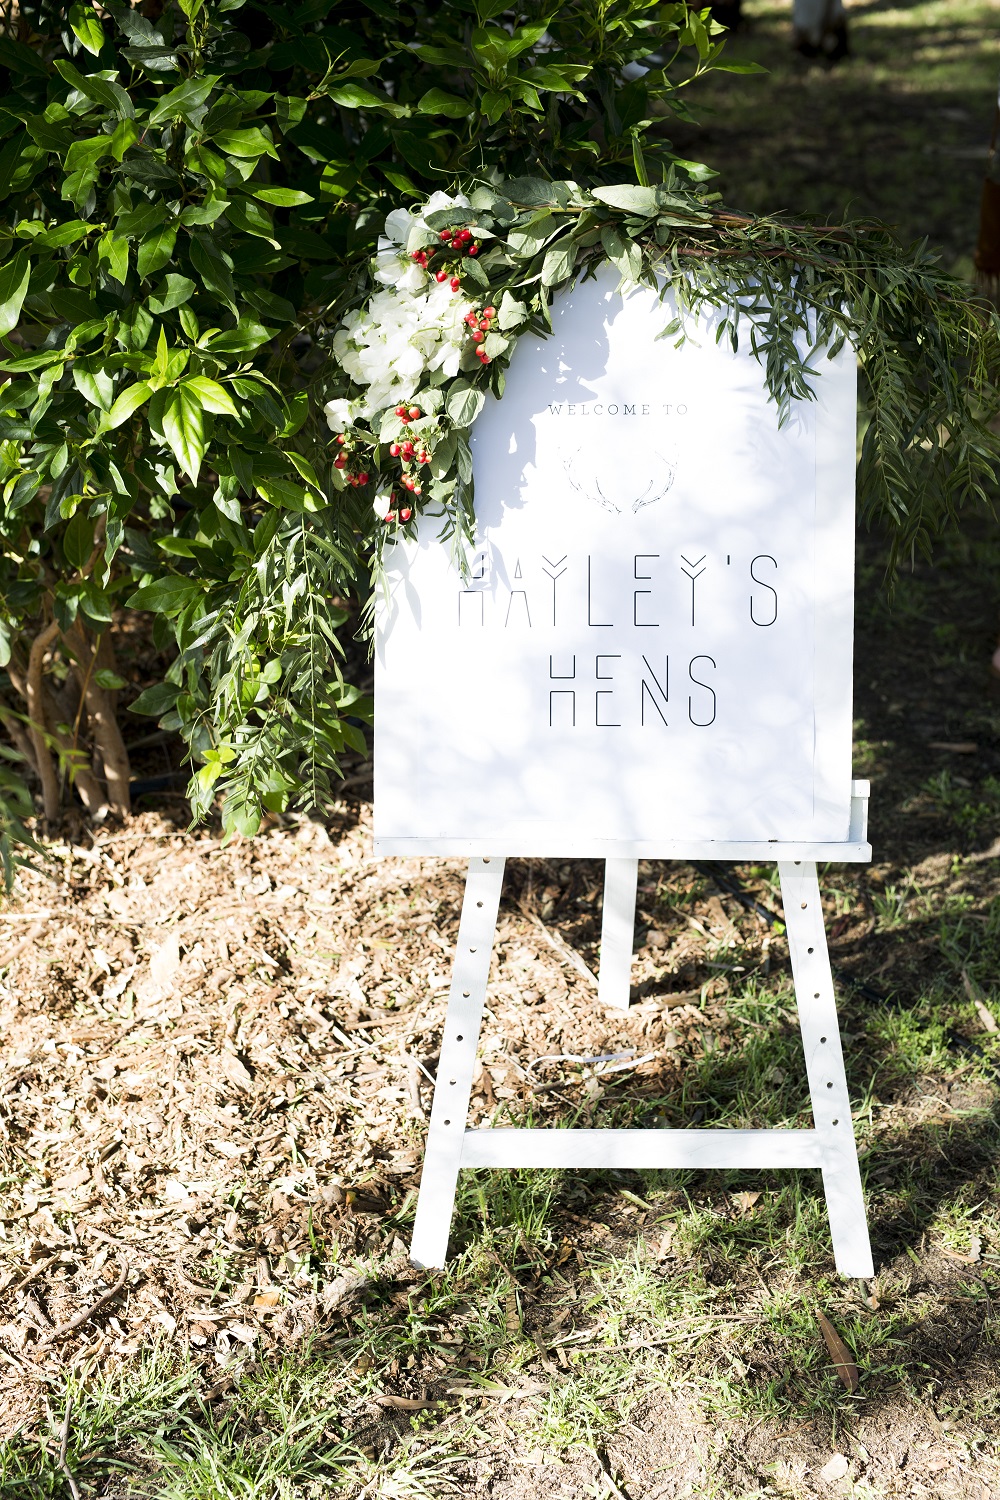 WHITE EASEL - Hire In Style